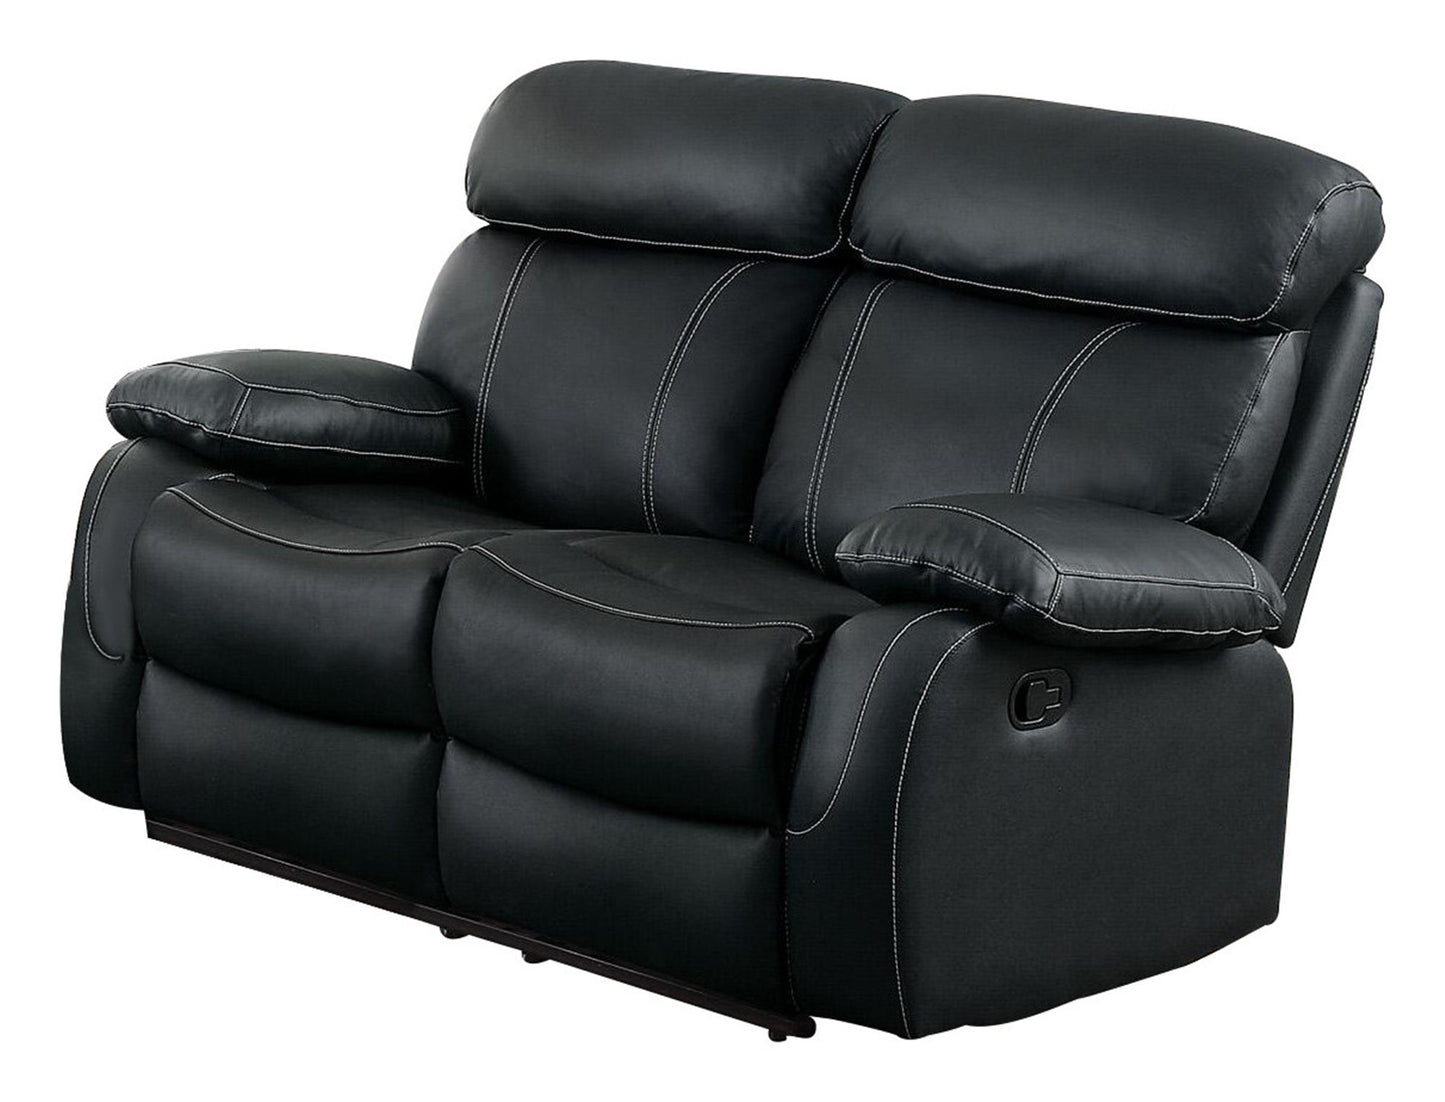 Homelegance Pendu 2PC Double Reclining Love Seat & Recliner Chair in Black Leather